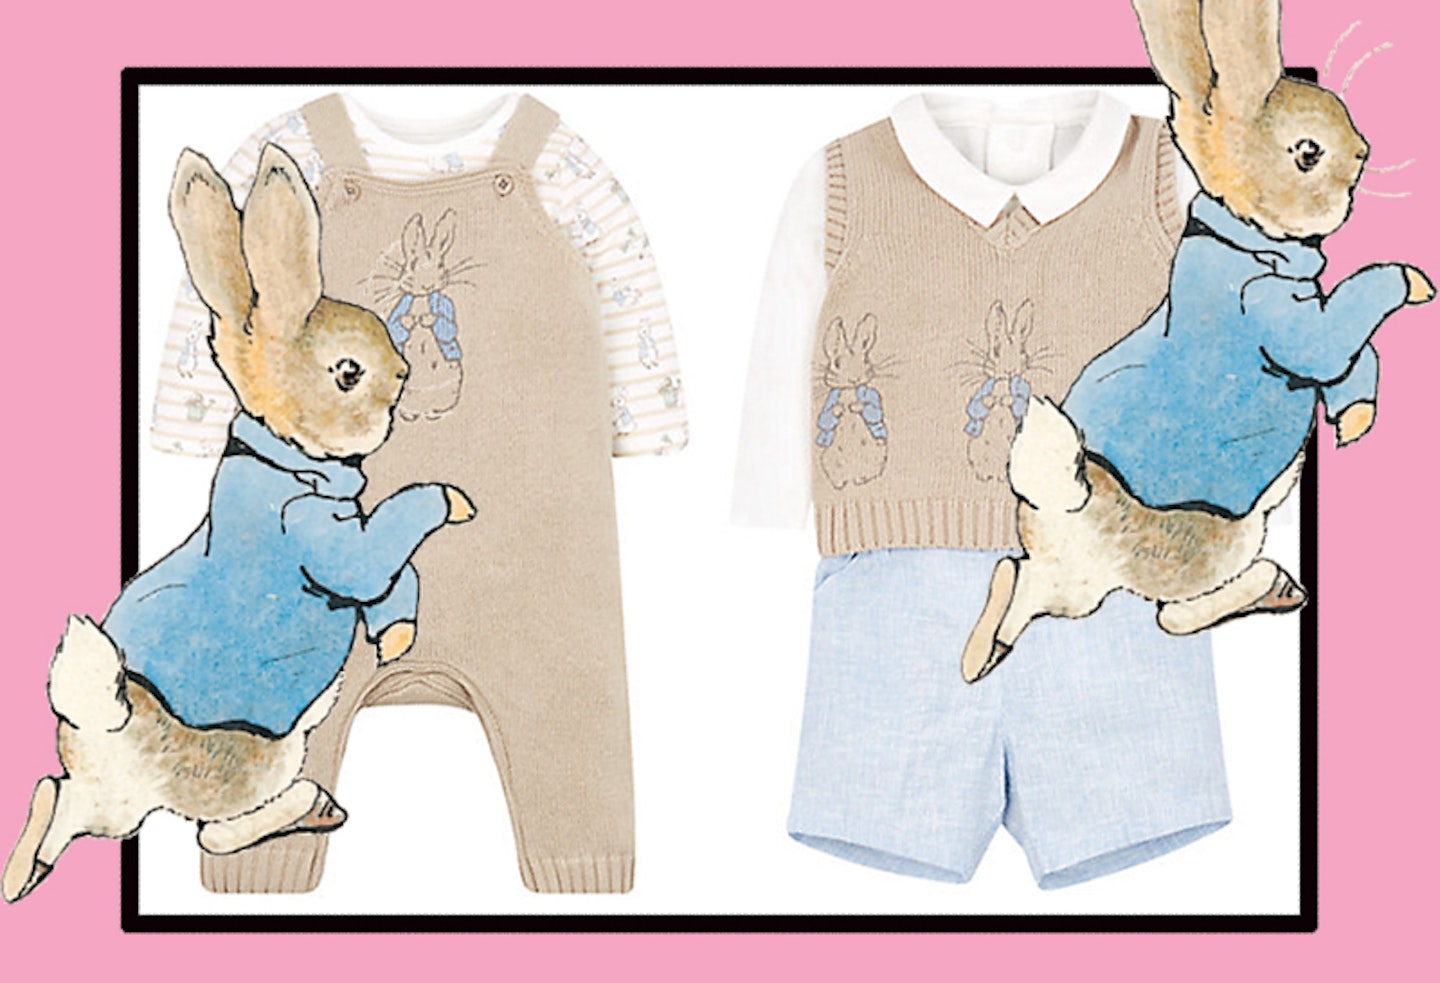 Mothercare launches Peter Rabbit baby clothing line and it’s adorable